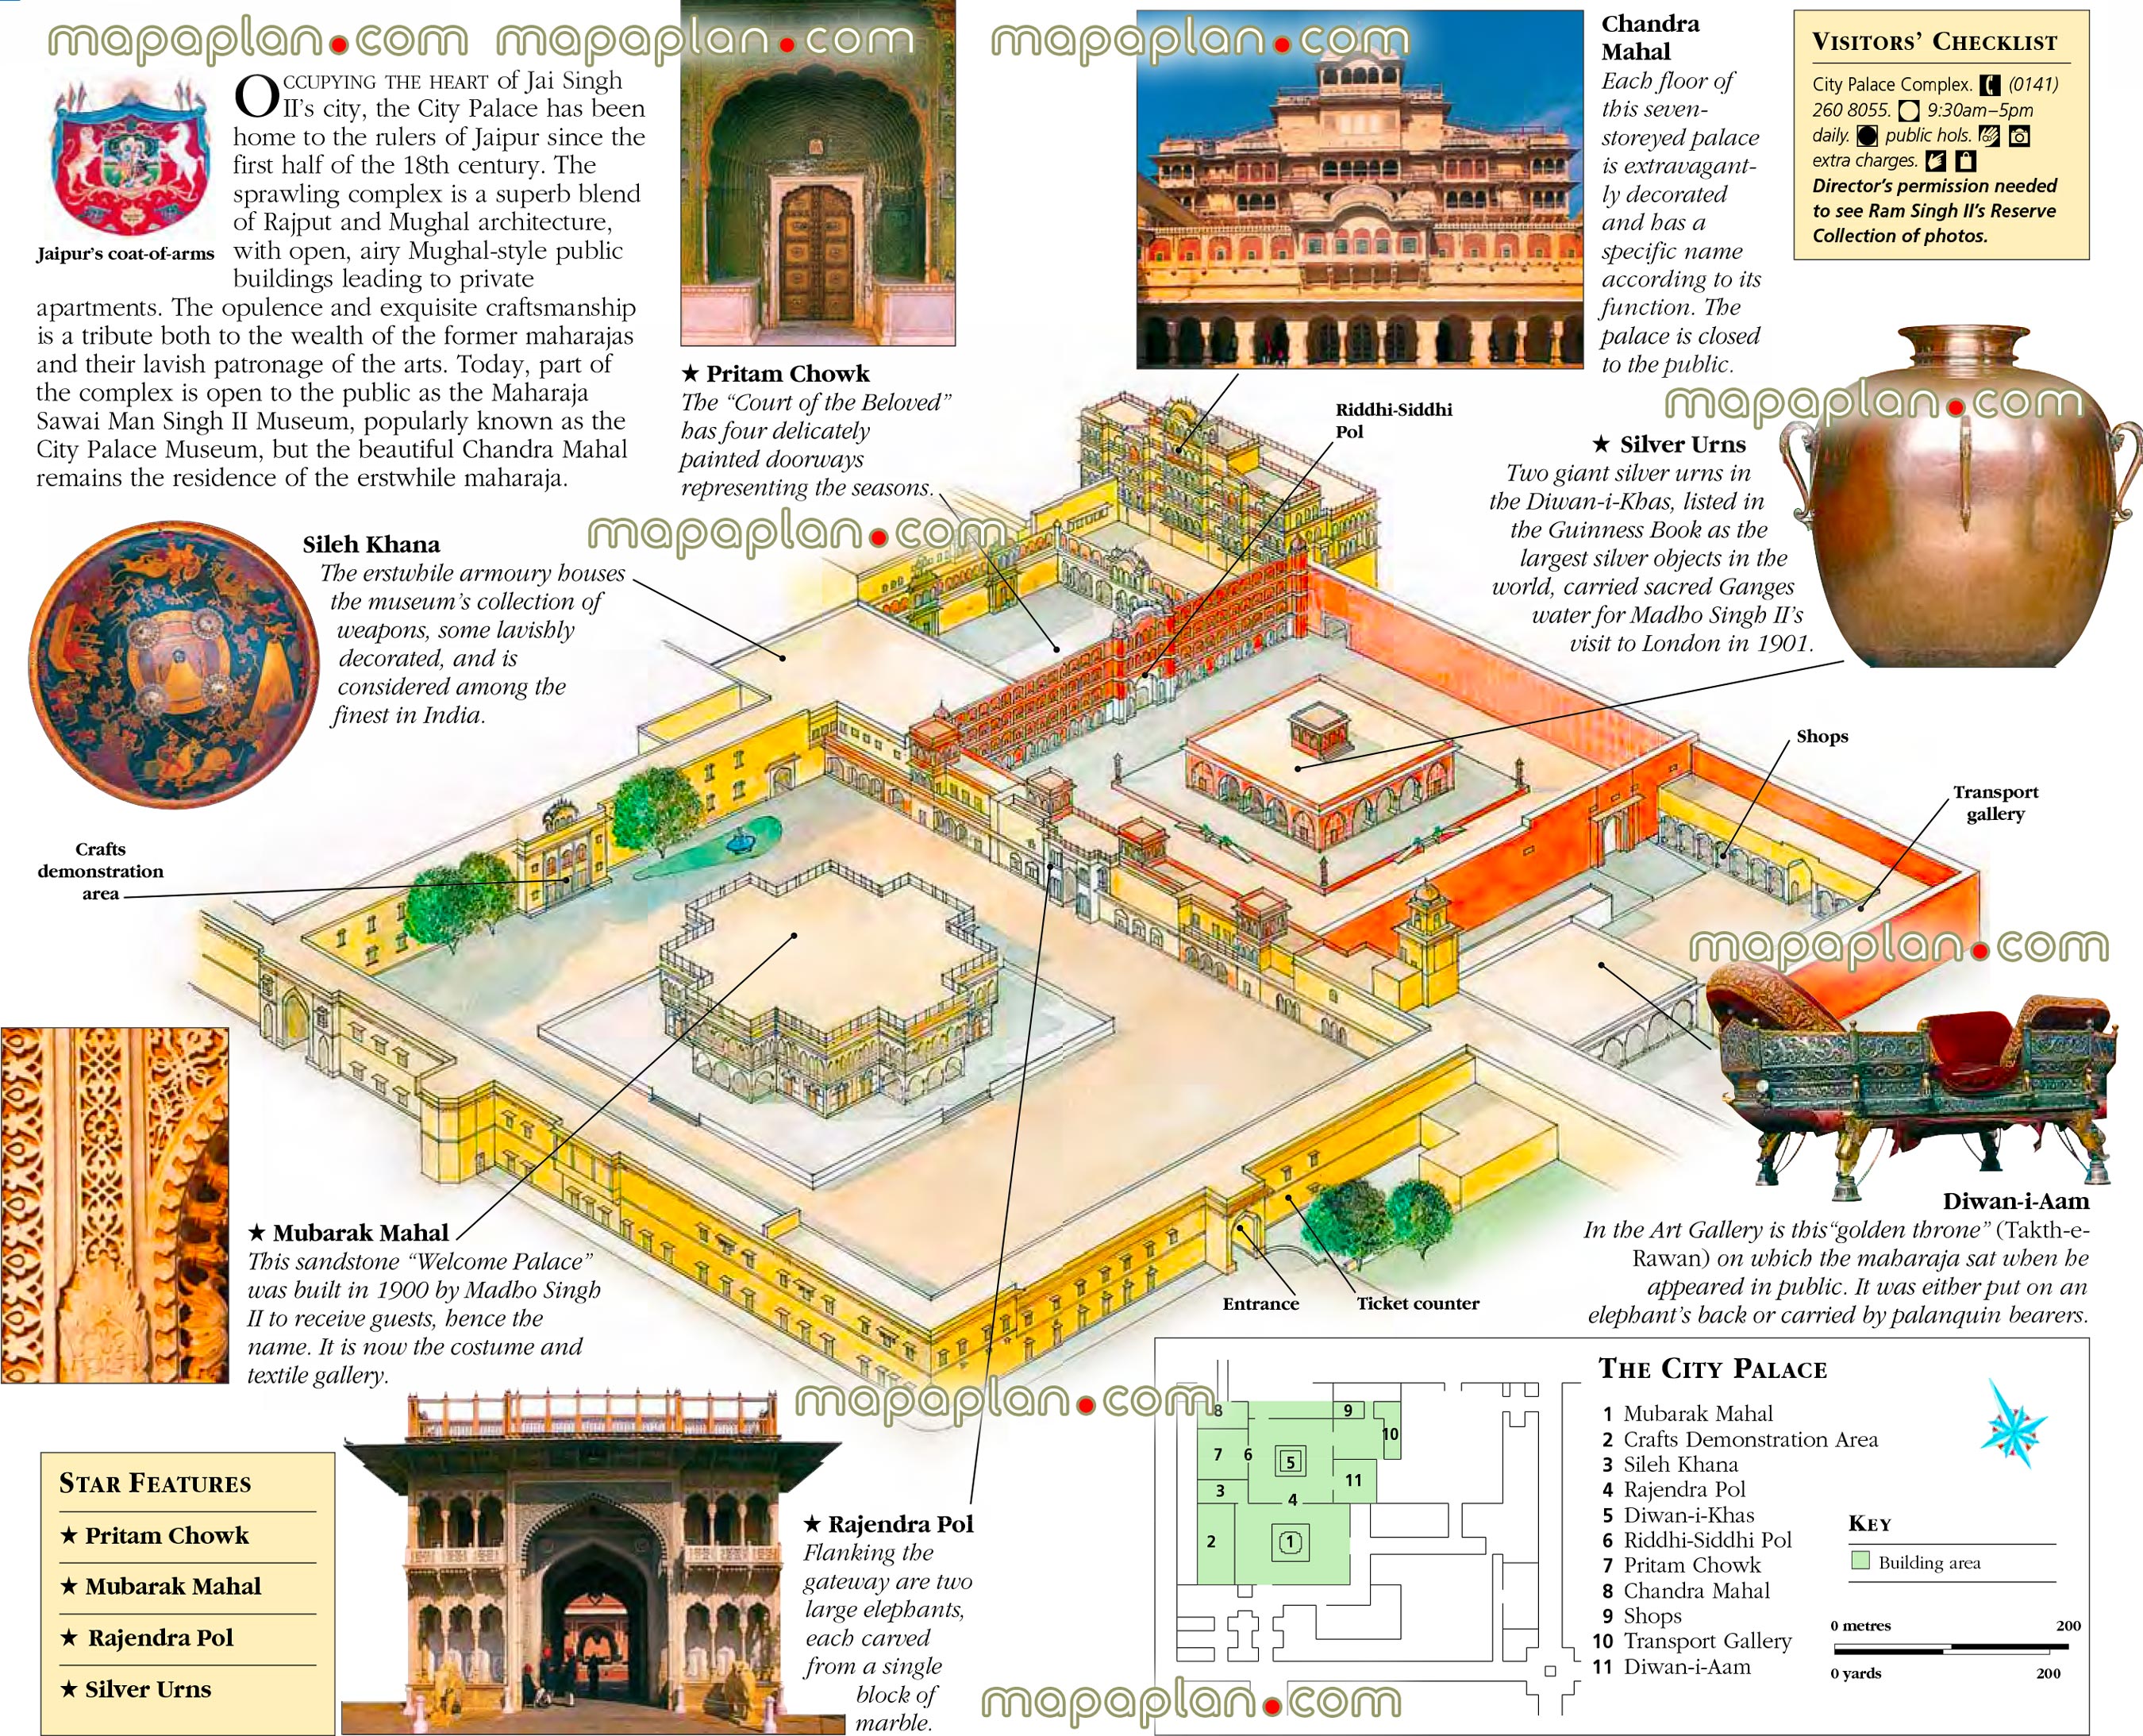 jaipur city palace museum detailed itinerary popout interactive historical places what see where go directions interesting things do photo image english guides Jaipur Top tourist attractions map